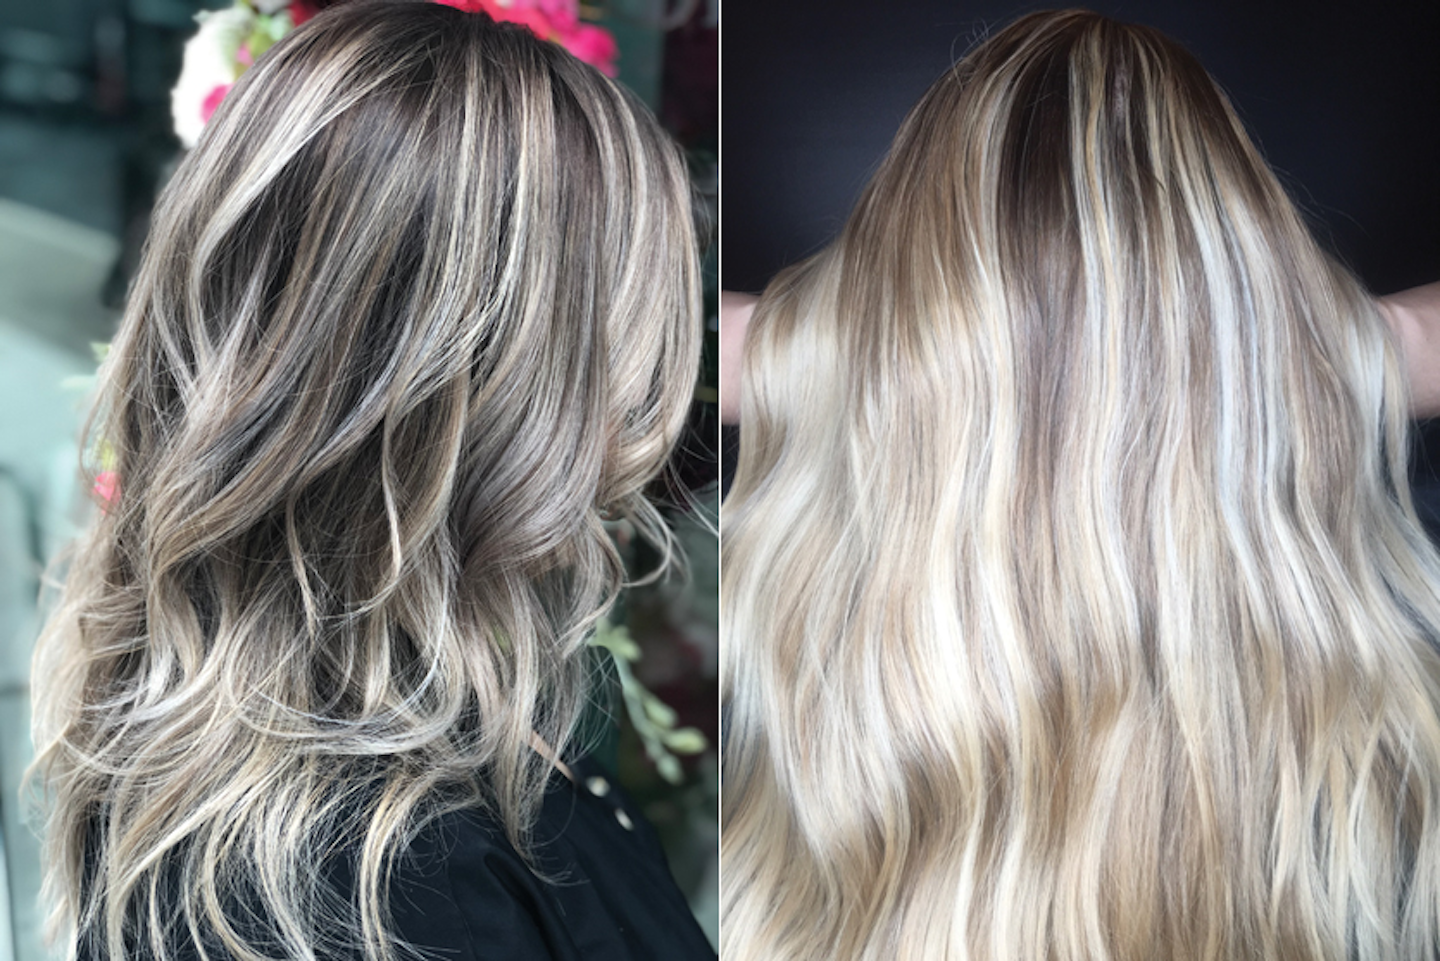 Top Colorists Reveal Their All-Time Favorite Shade Techniques | Beauty